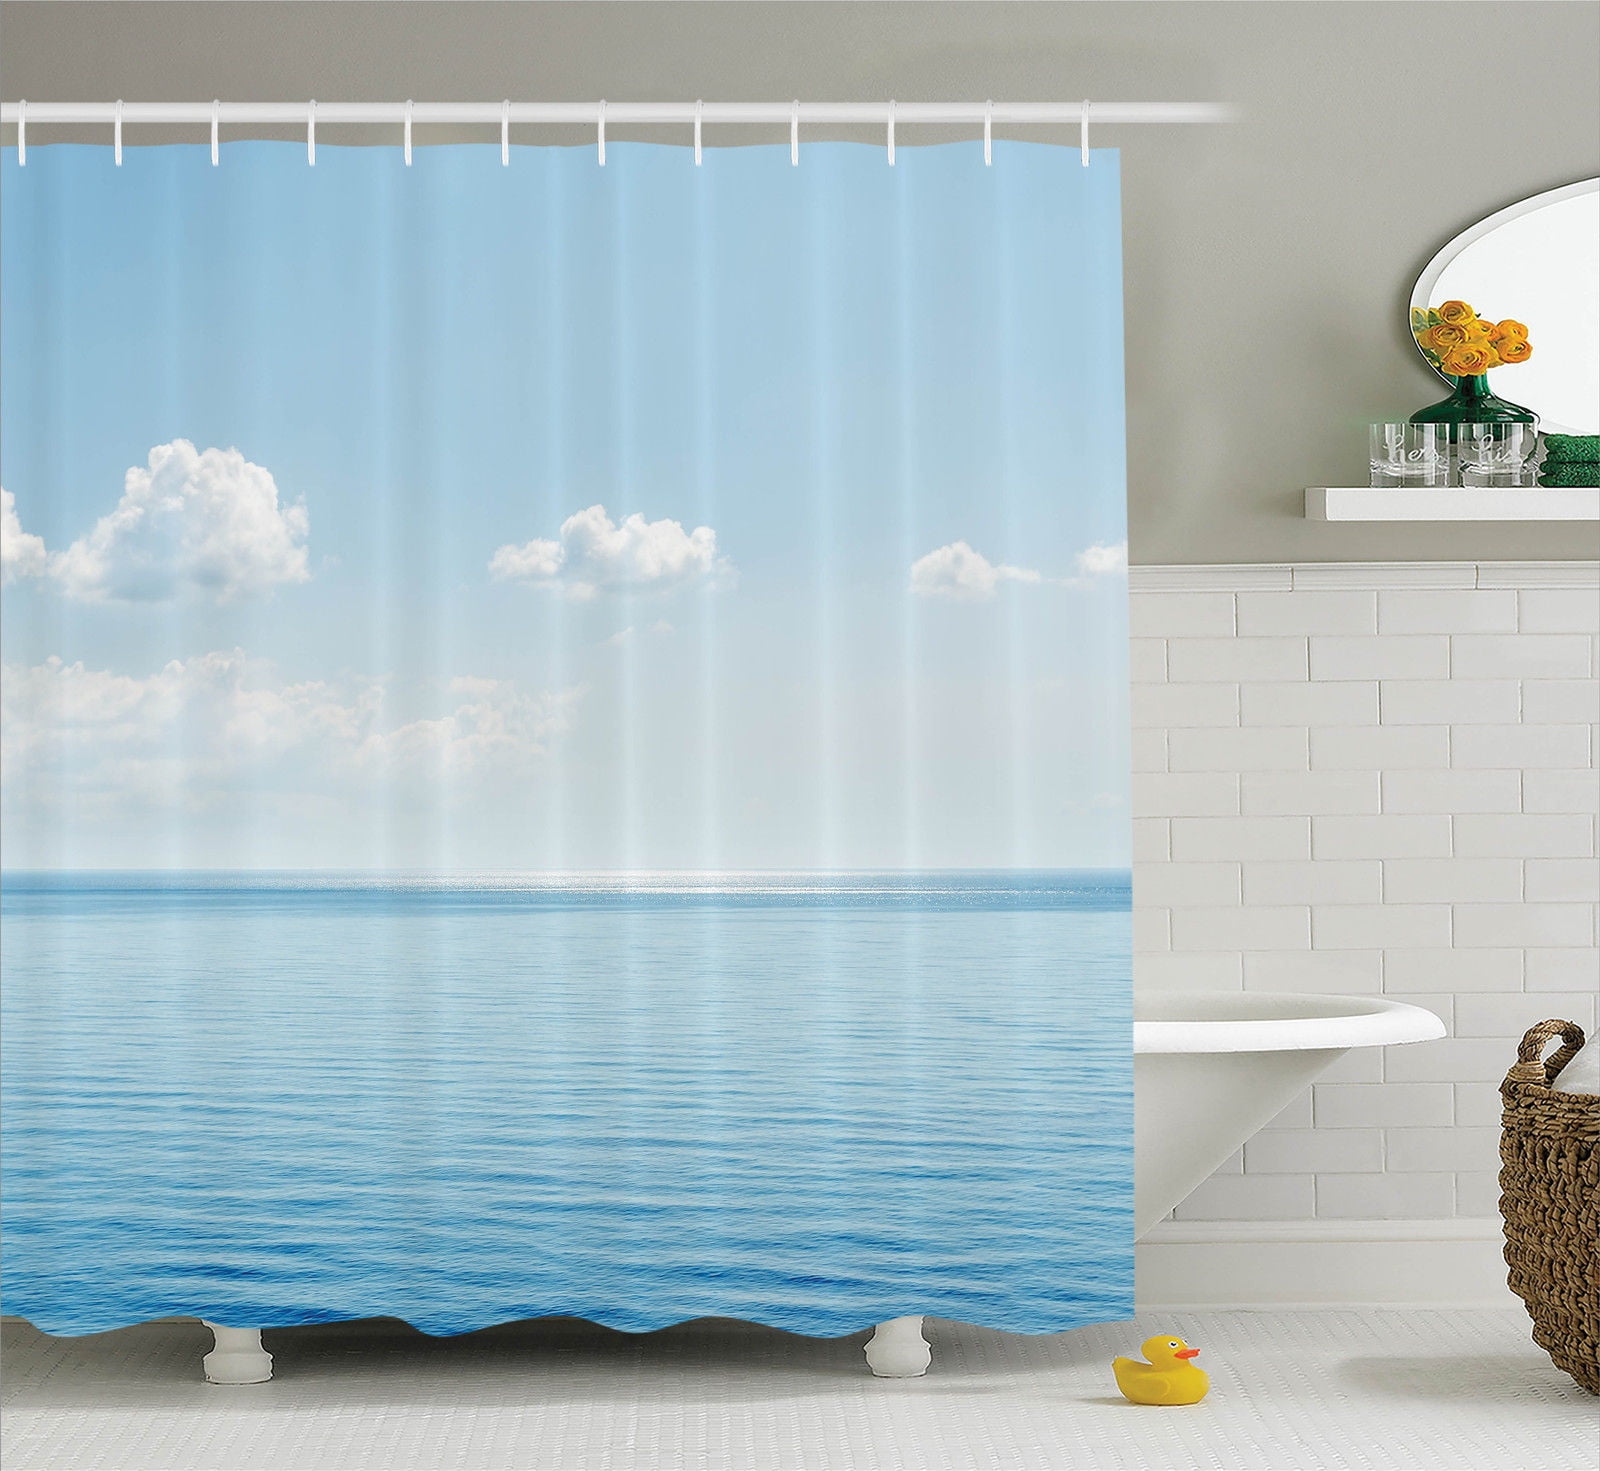 Ocean Decor Aquatic Seascape With Sky Landscape In Tropical Lands  Relaxation Spot In The Coast, Bathroom Accessories, 69W X 84L Inches Extra  Long, By Ambesonne - Walmart.com